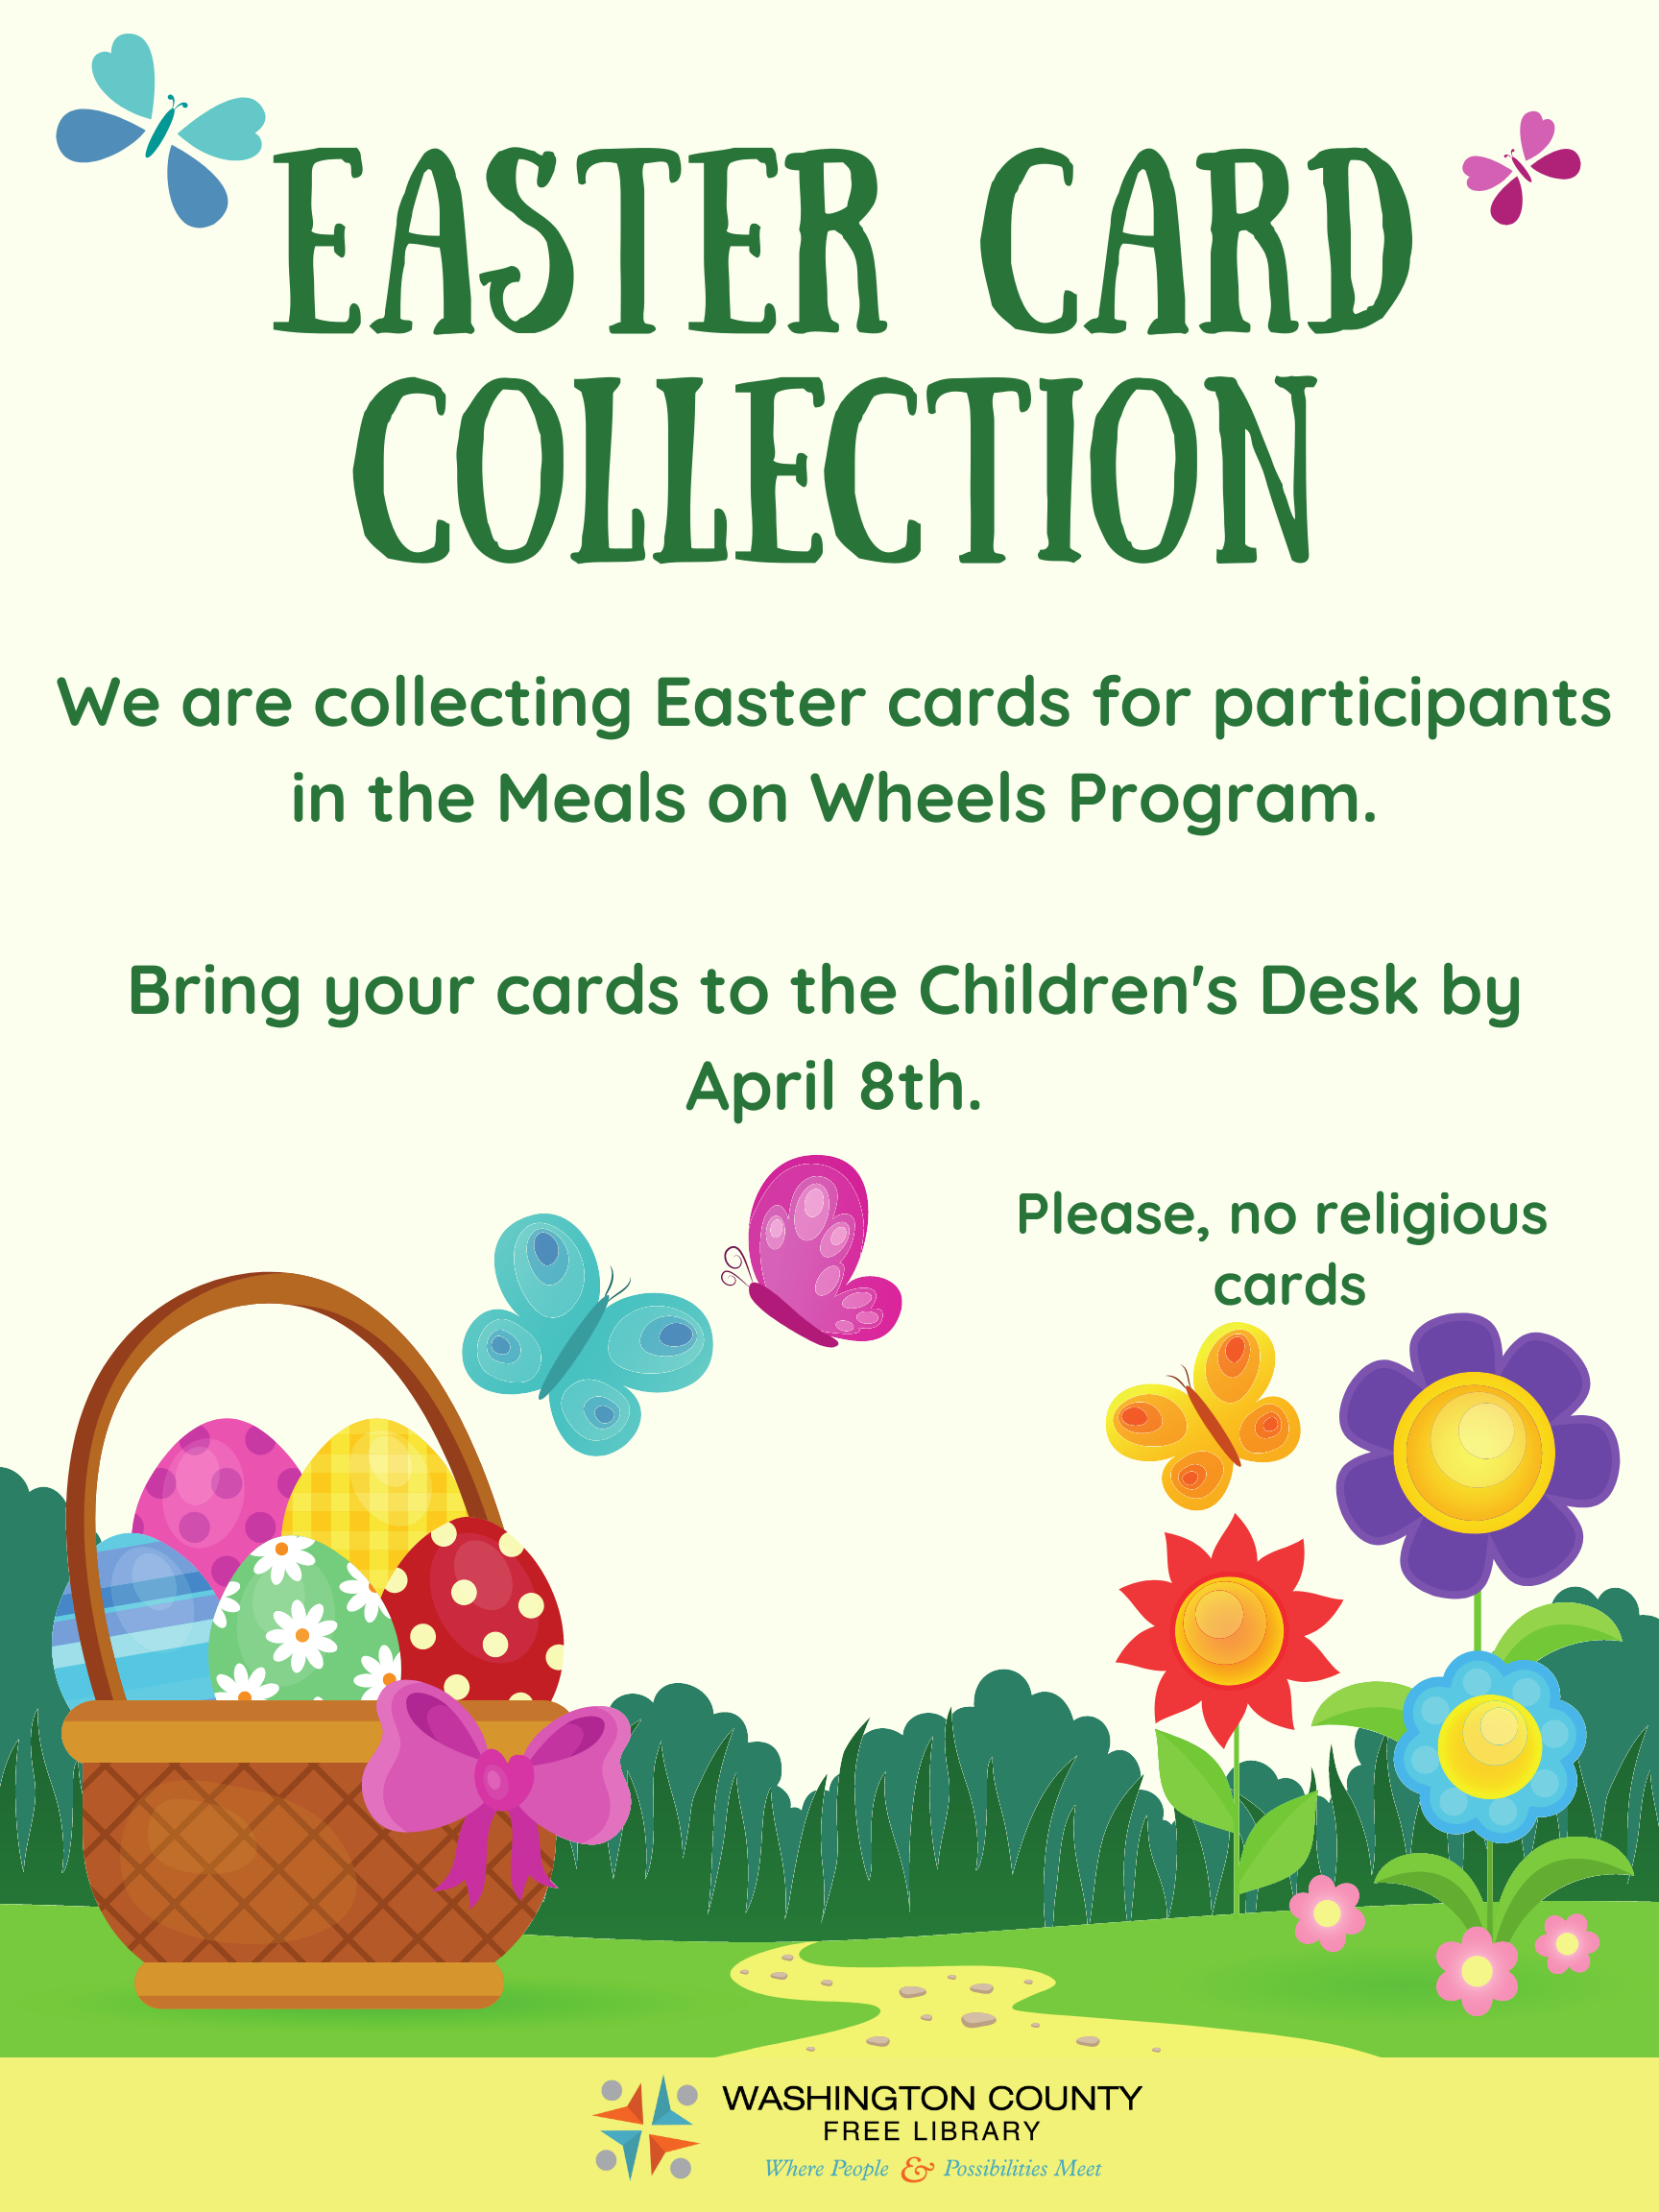 Easter Card Collection for Meals on Wheels